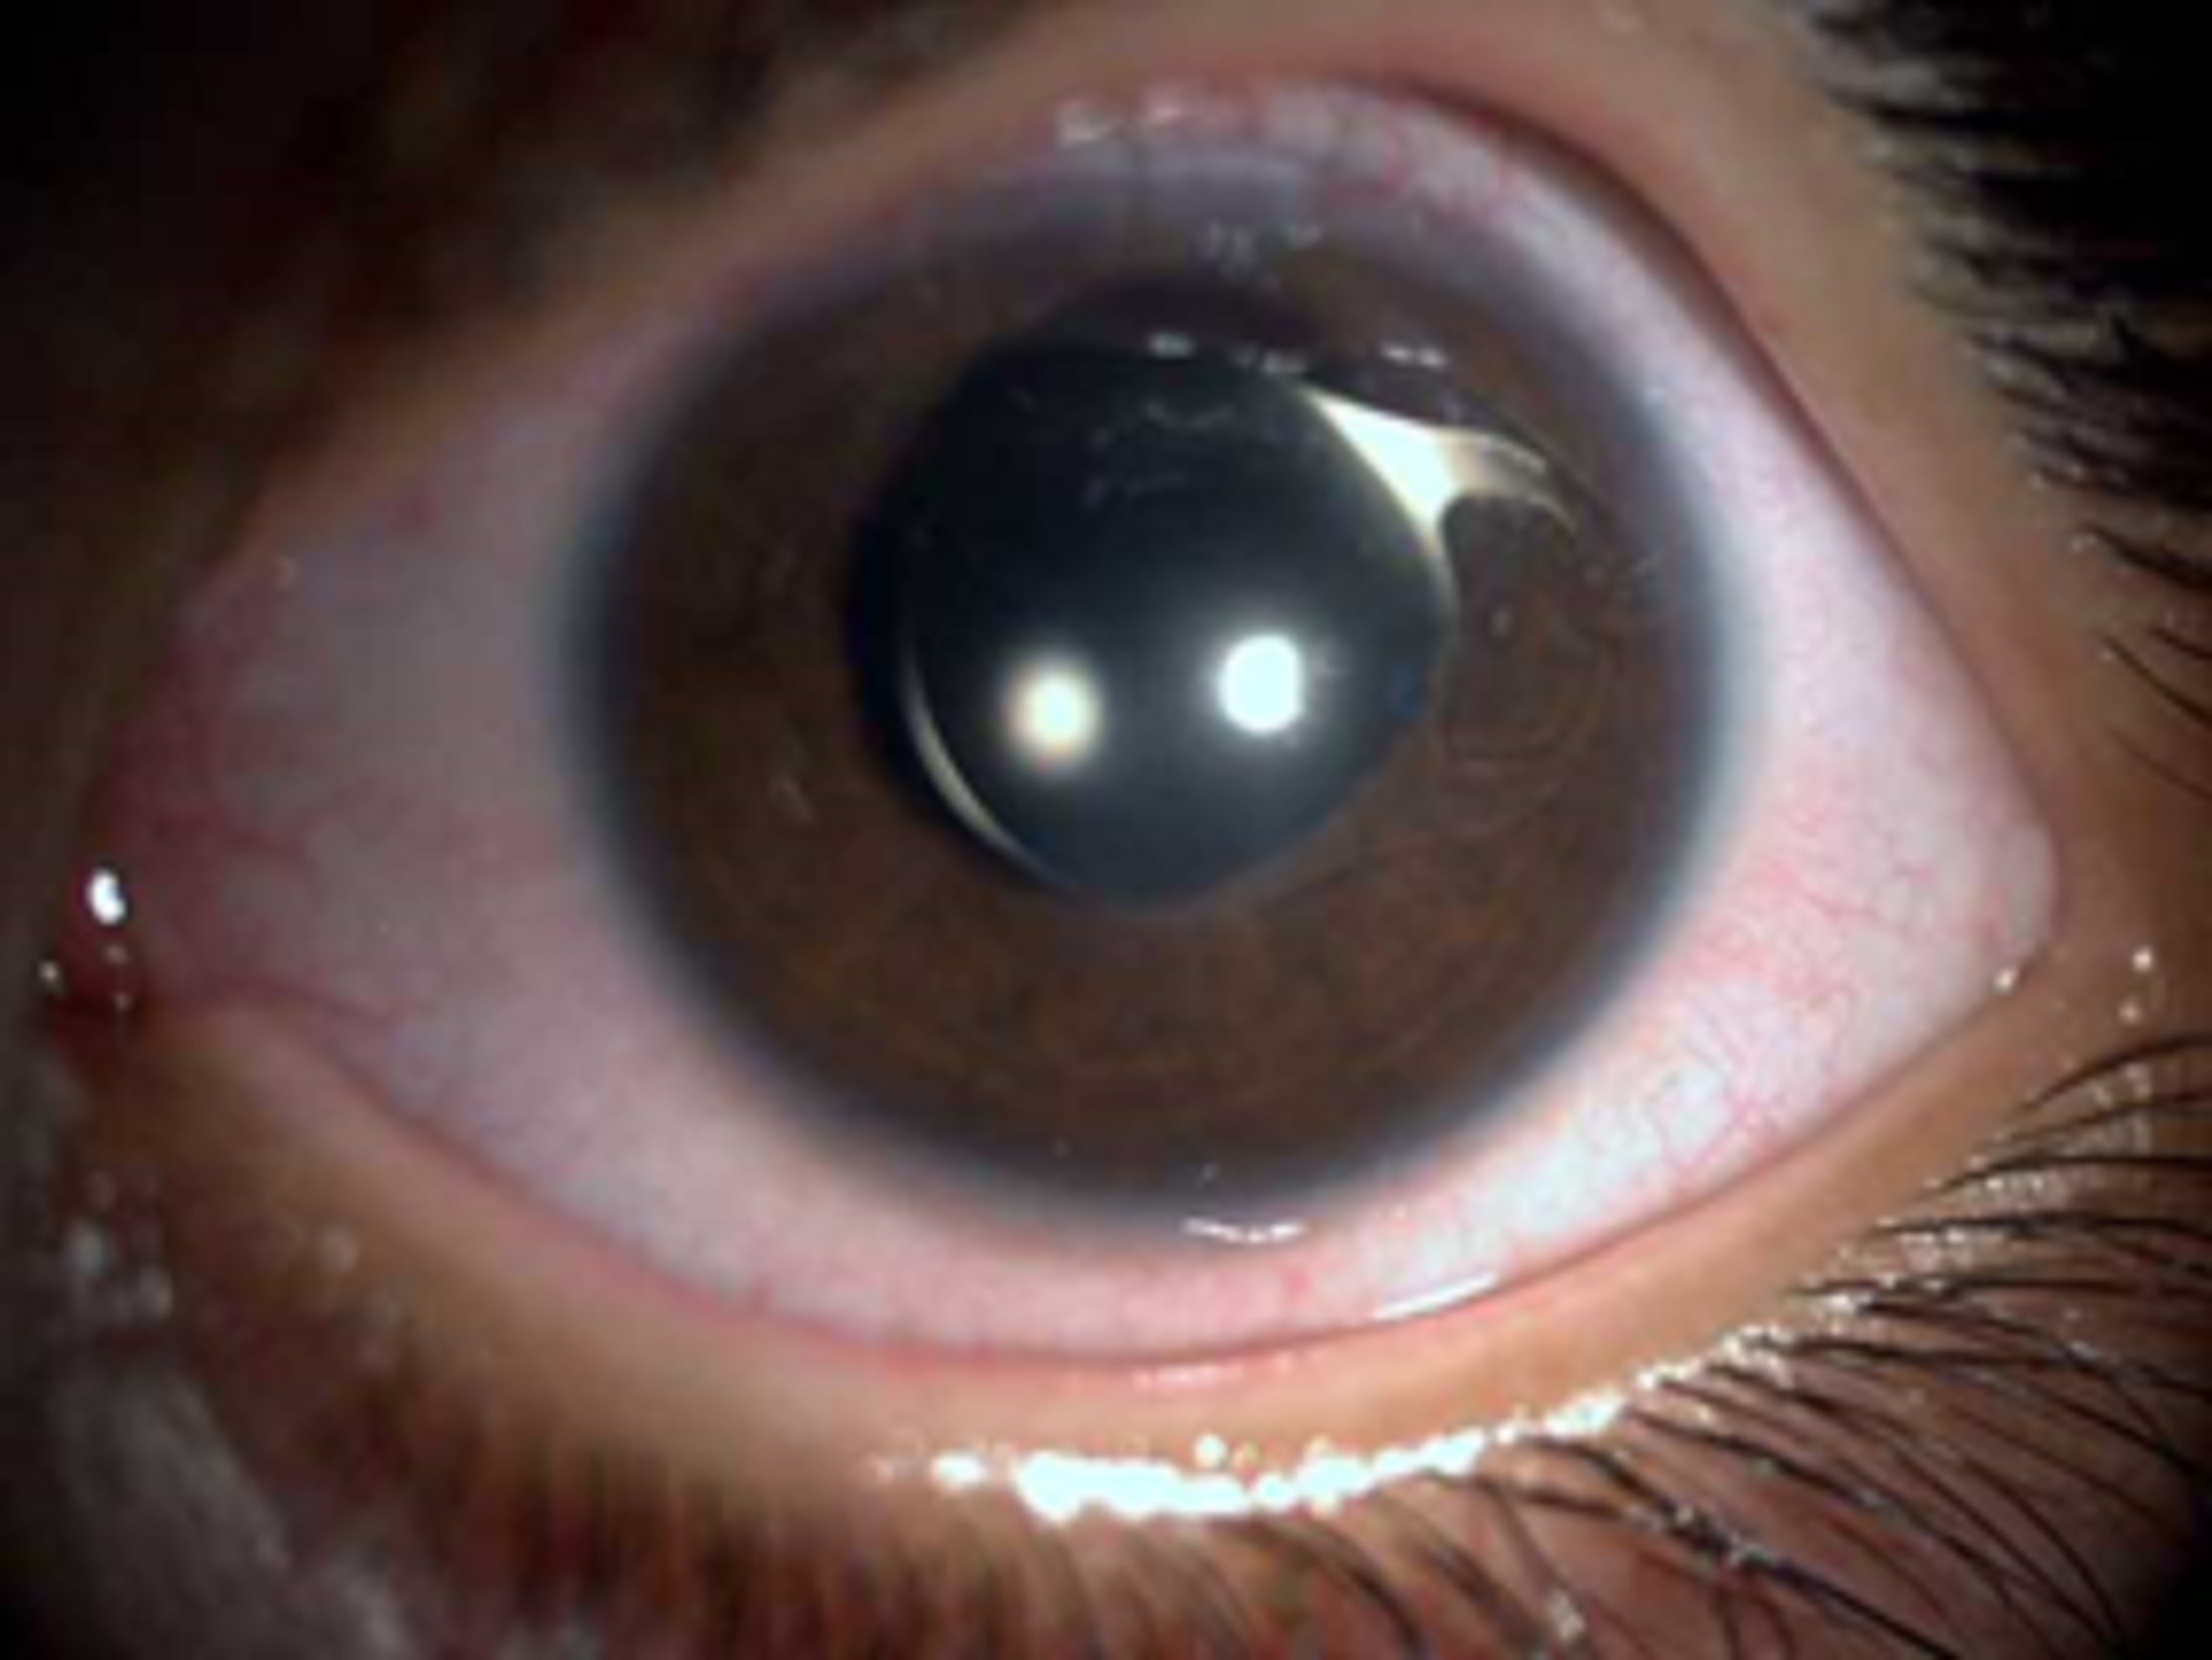 Boos worden Voel me slecht Methode Cureus | Unilateral and Spontaneous Complete Anterior Dislocation of the  Crystalline Lens in a Patient With Homocystinuria | Article